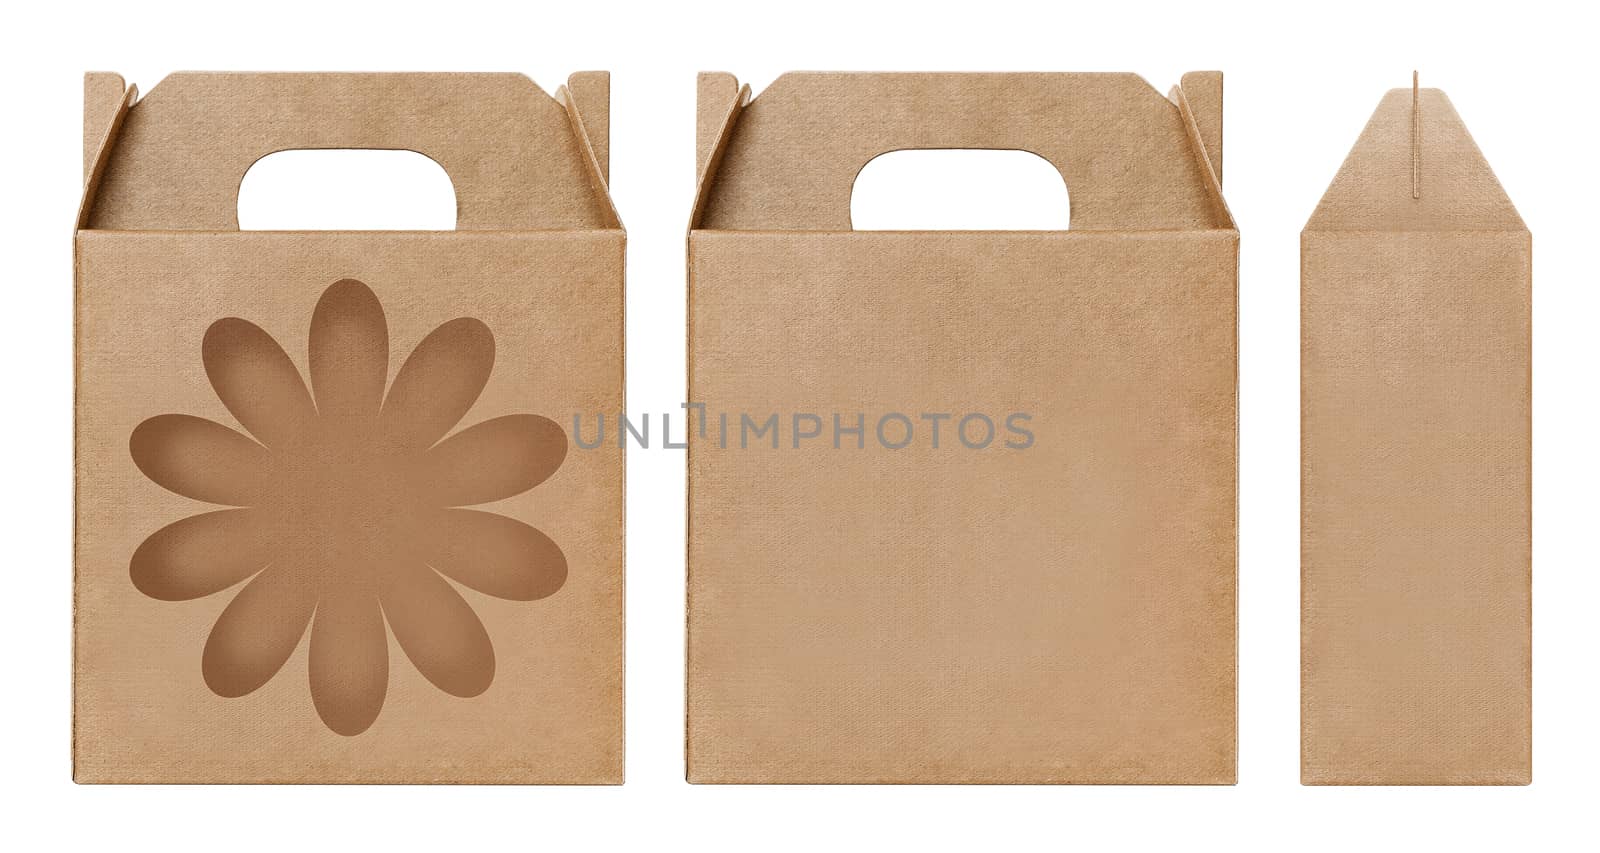 Box brown window Flower shape cut out Packaging template, Empty kraft Box Cardboard isolated white background, Boxes Paper kraft natural material, Gift Box Brown Paper from Industrial Packaging carton